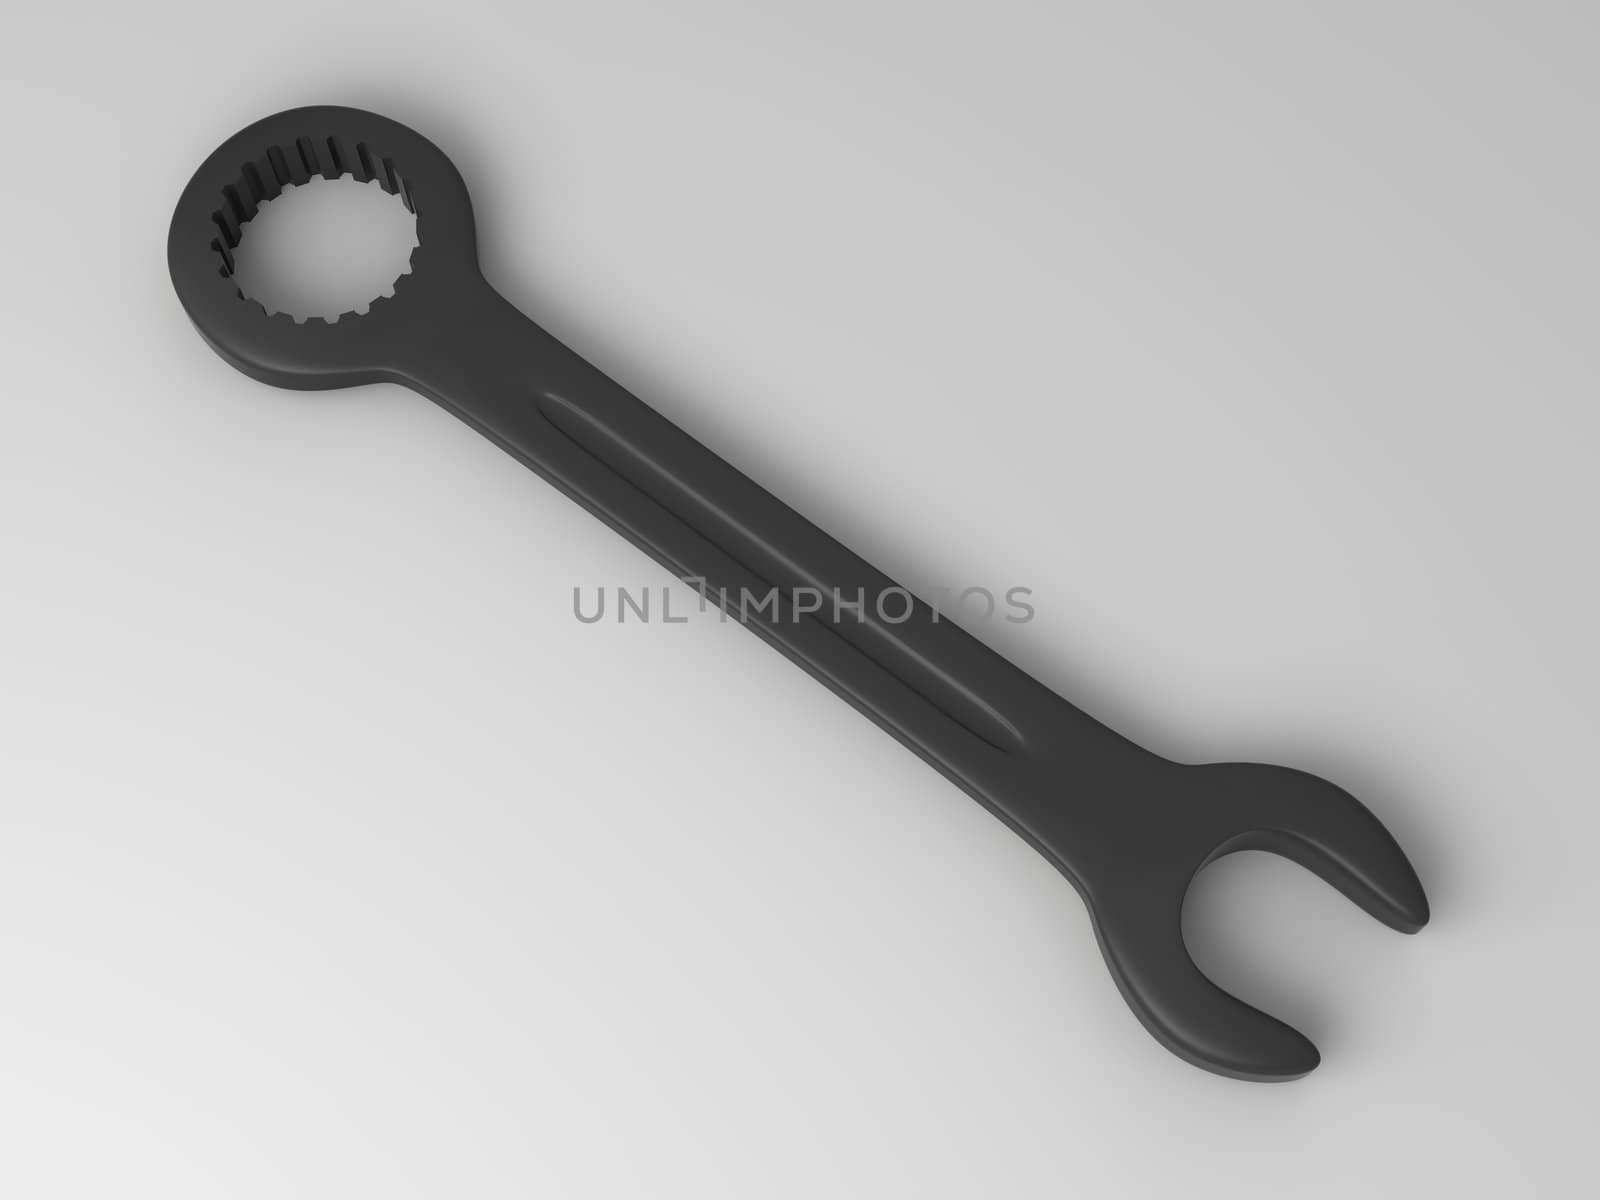 Wrench by Spectral